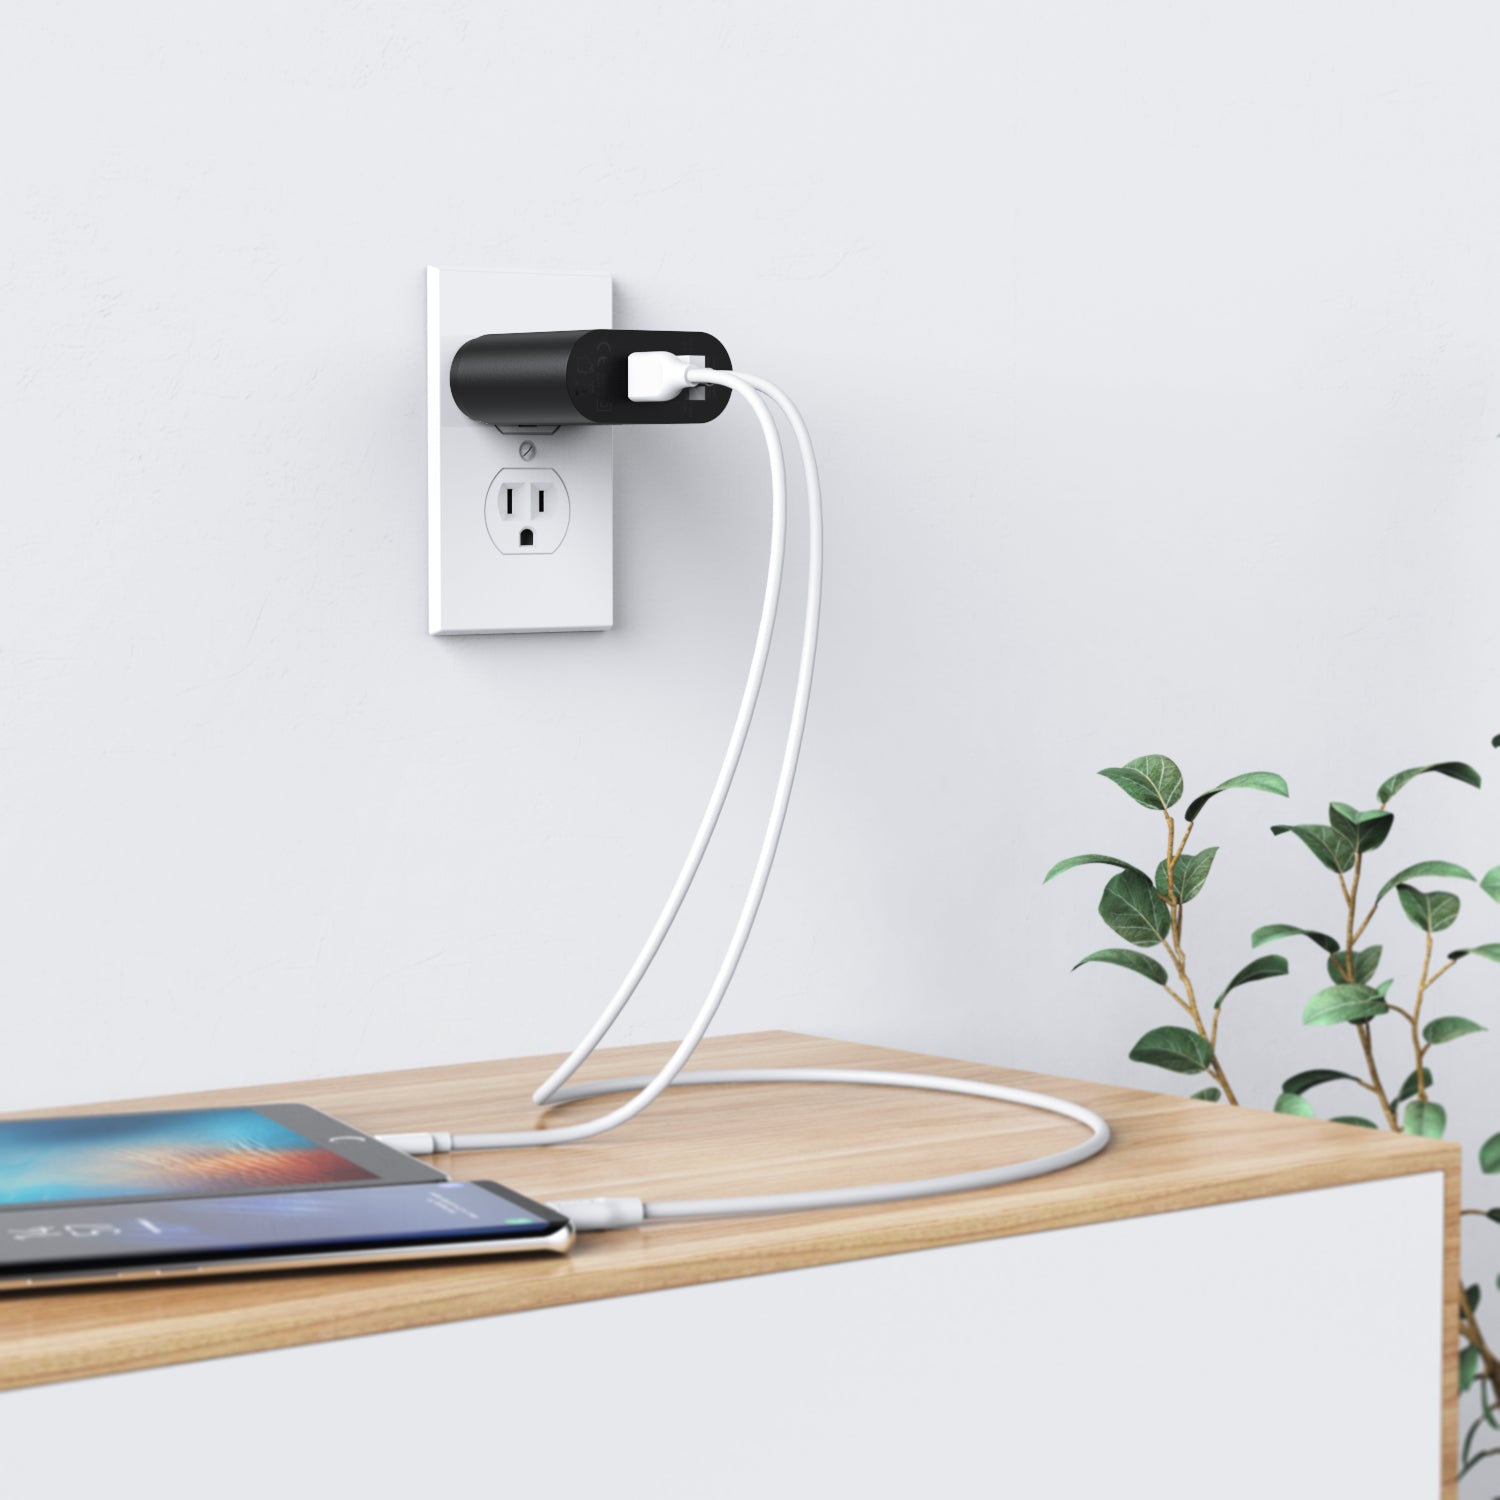 AUKEY Accel Easy Charge with 3 USB Ports, PA-T16